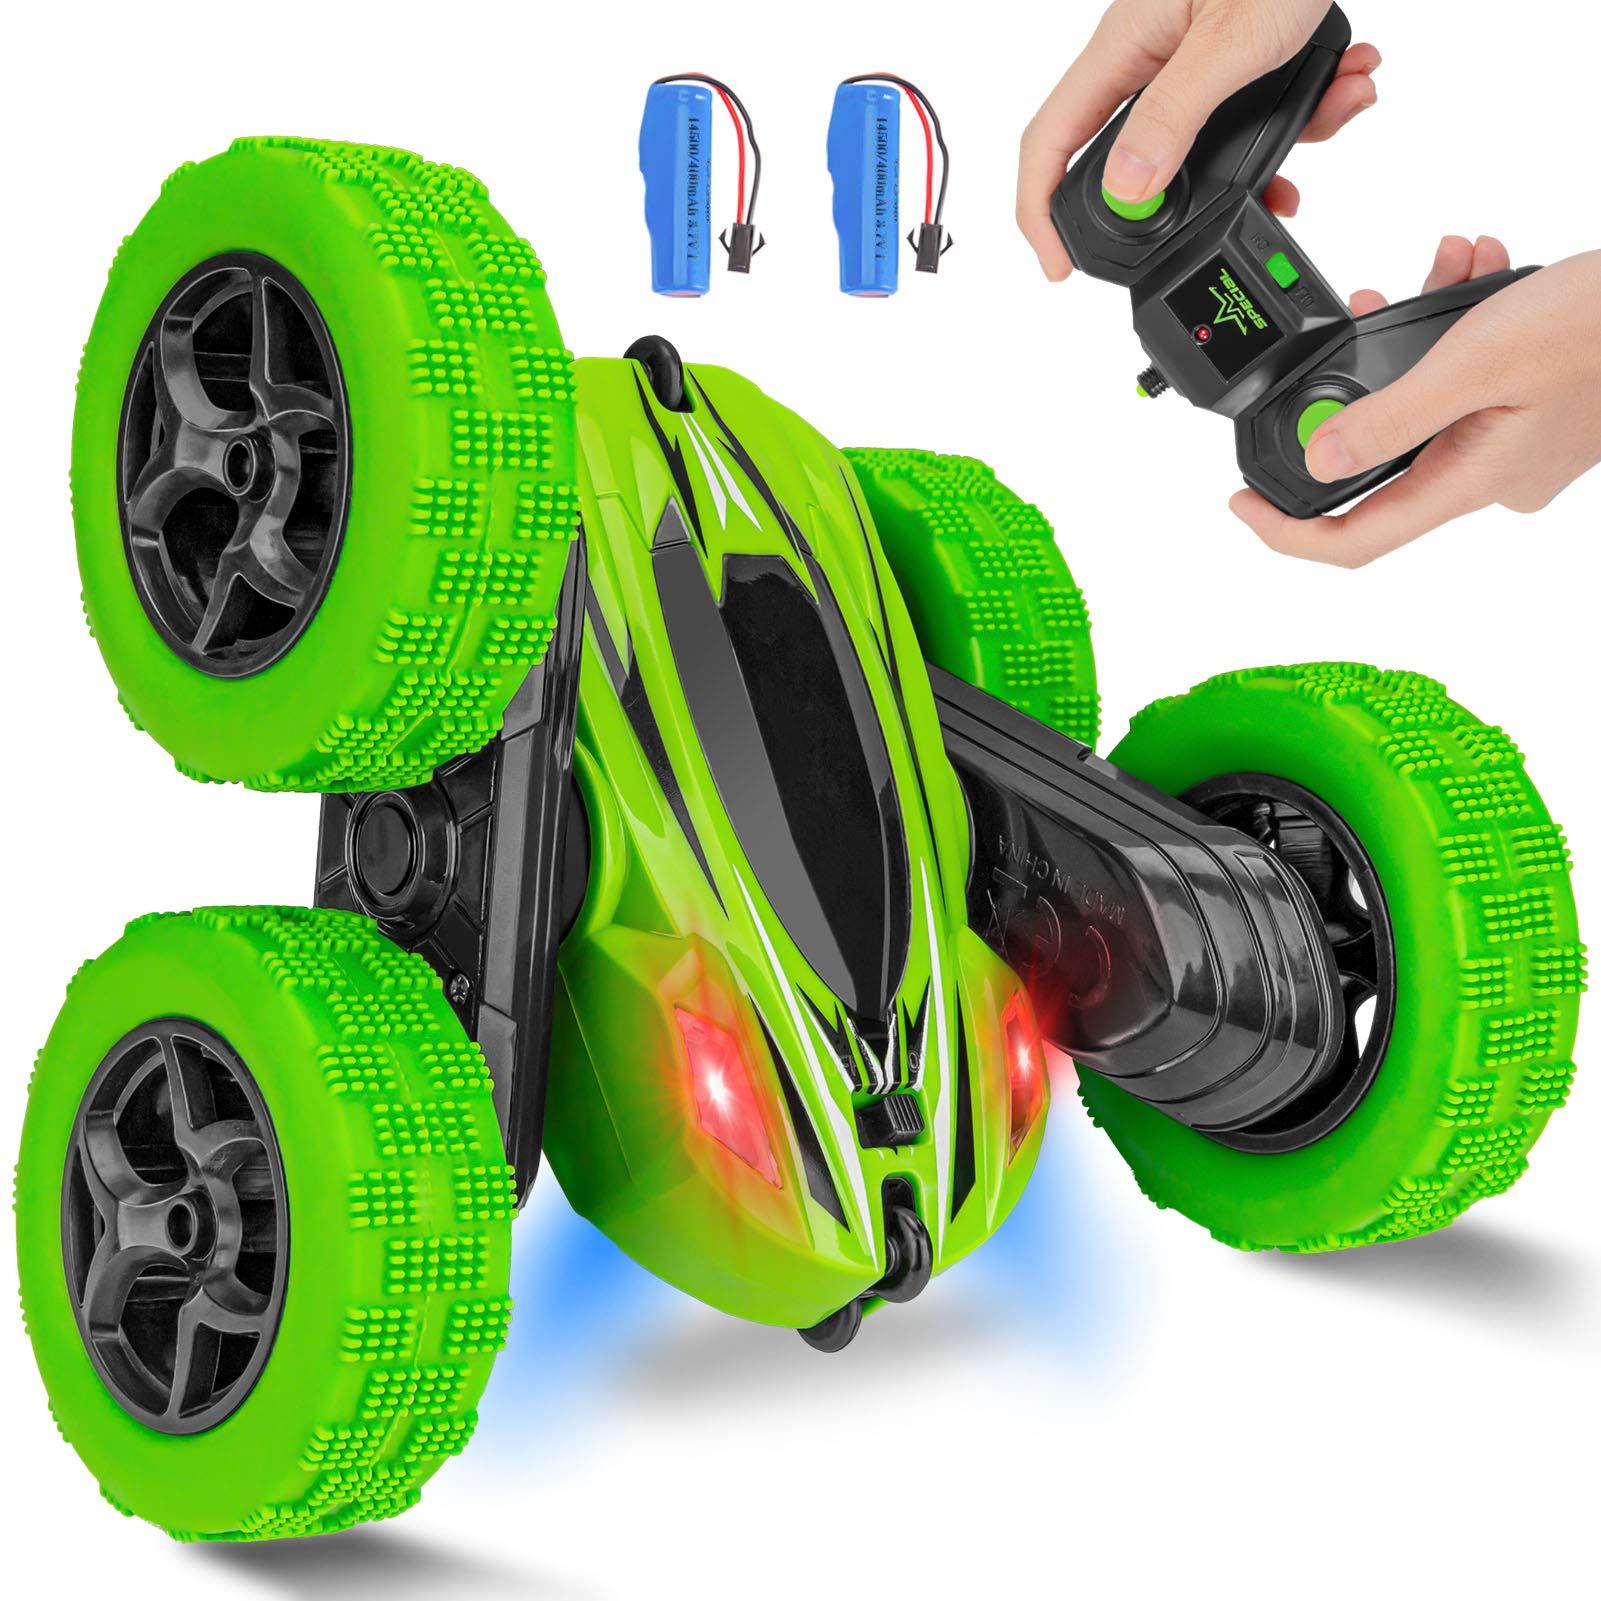 360 Rc Car: Vibrant Color Options for Ultimate Customization Fun